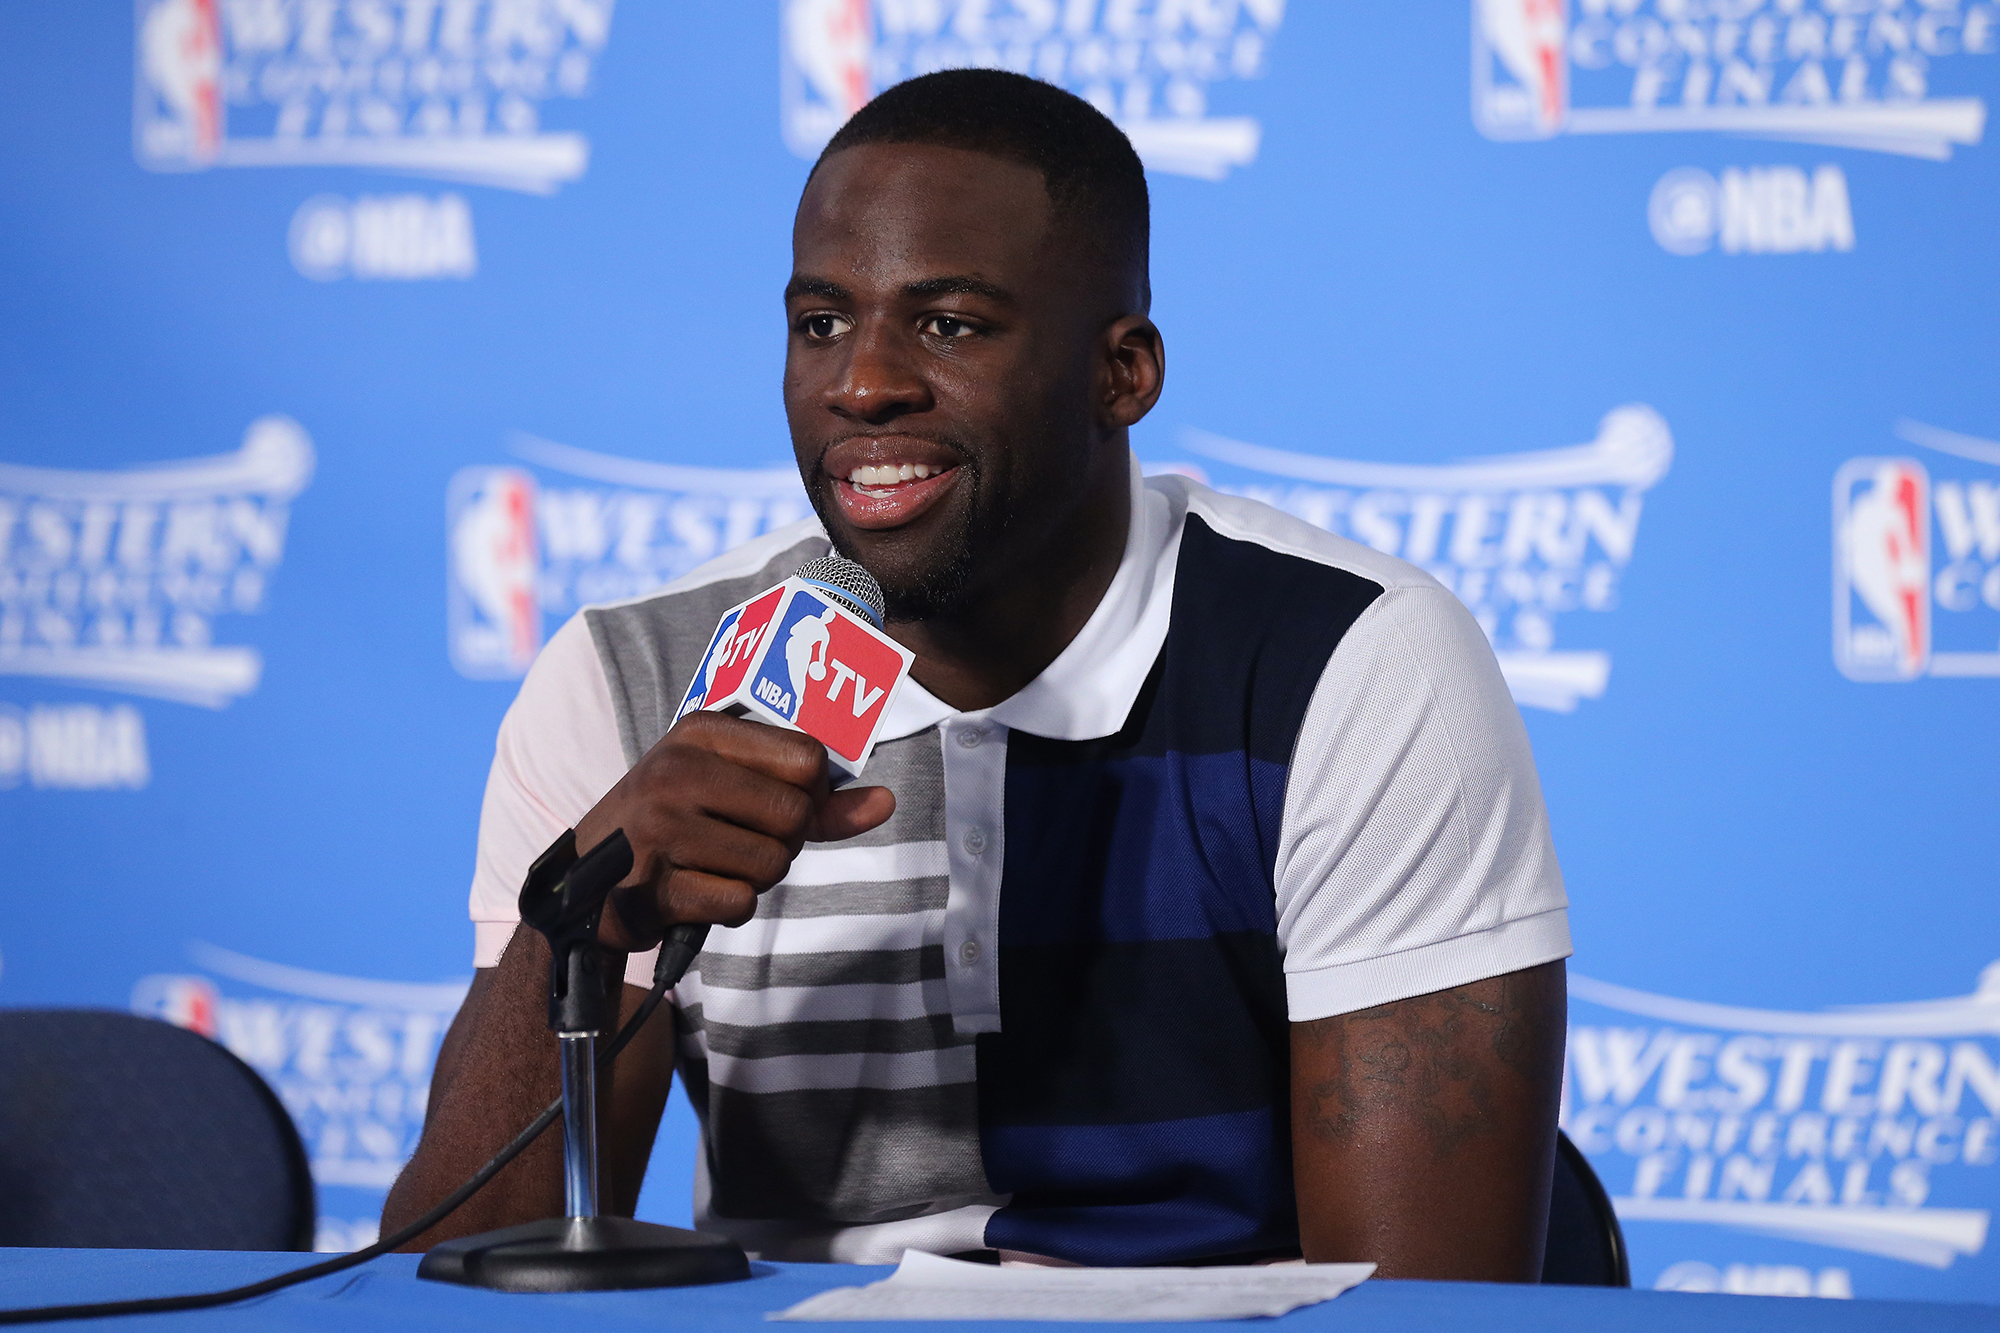 OAKLAND, CA - MAY 18:  Draymond Green #23 of the Golden State Warriors talks to the media during a press conference (Photo by Layne Murdoch/NBAE via Getty Images) (Layne Murdoch&mdash;NBAE/Getty Images)